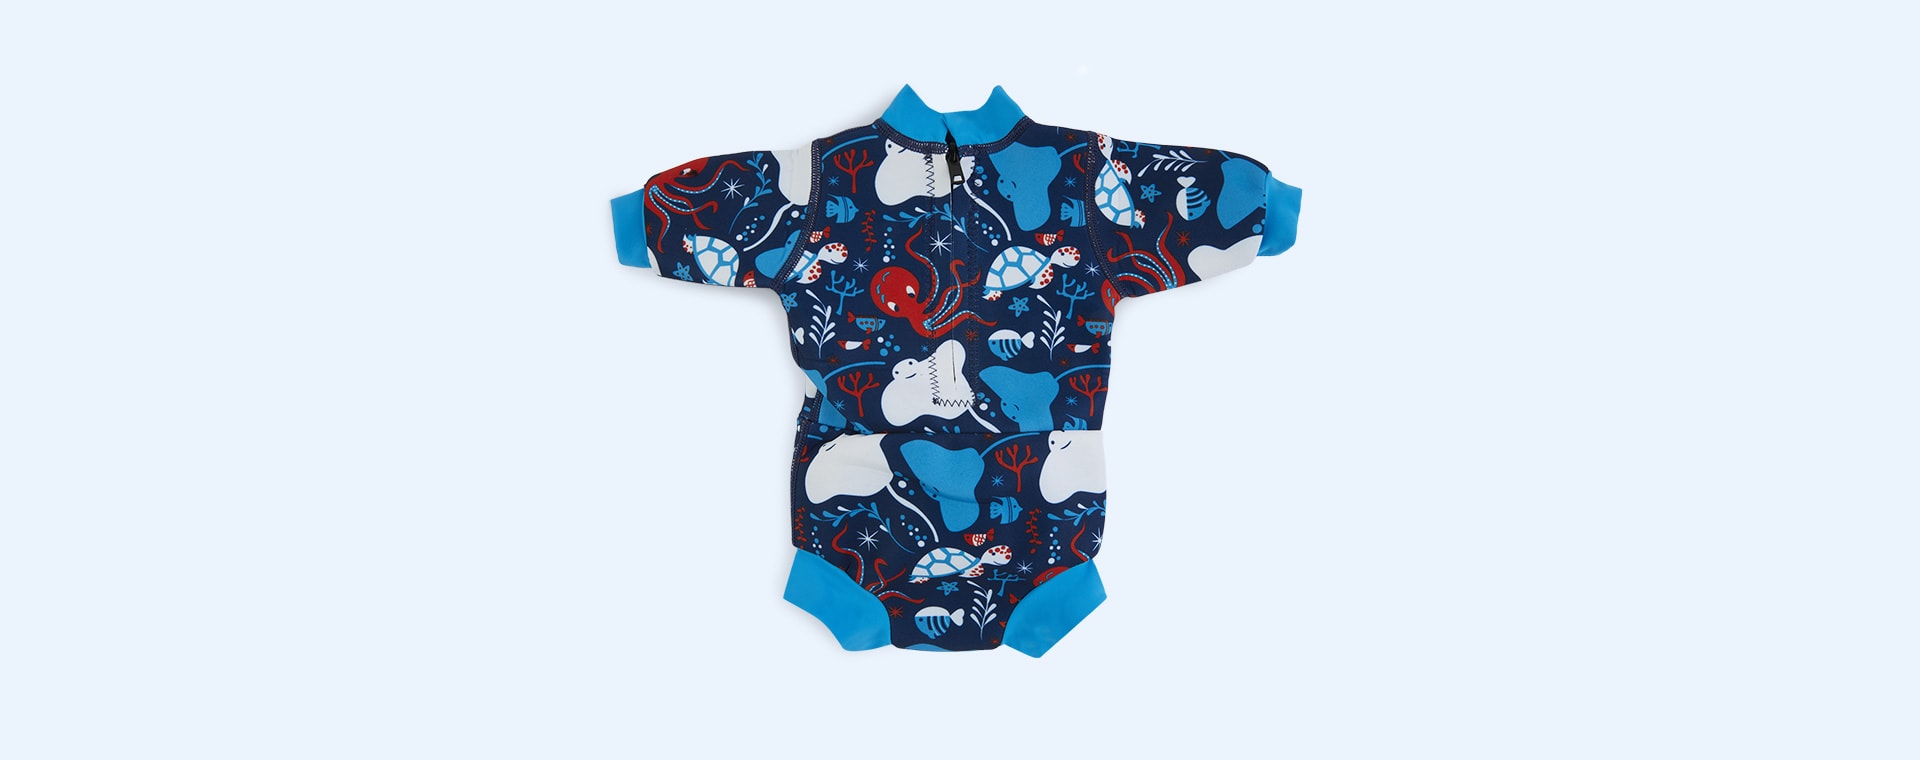 Under The Sea Splash About Happy Nappy Wetsuit